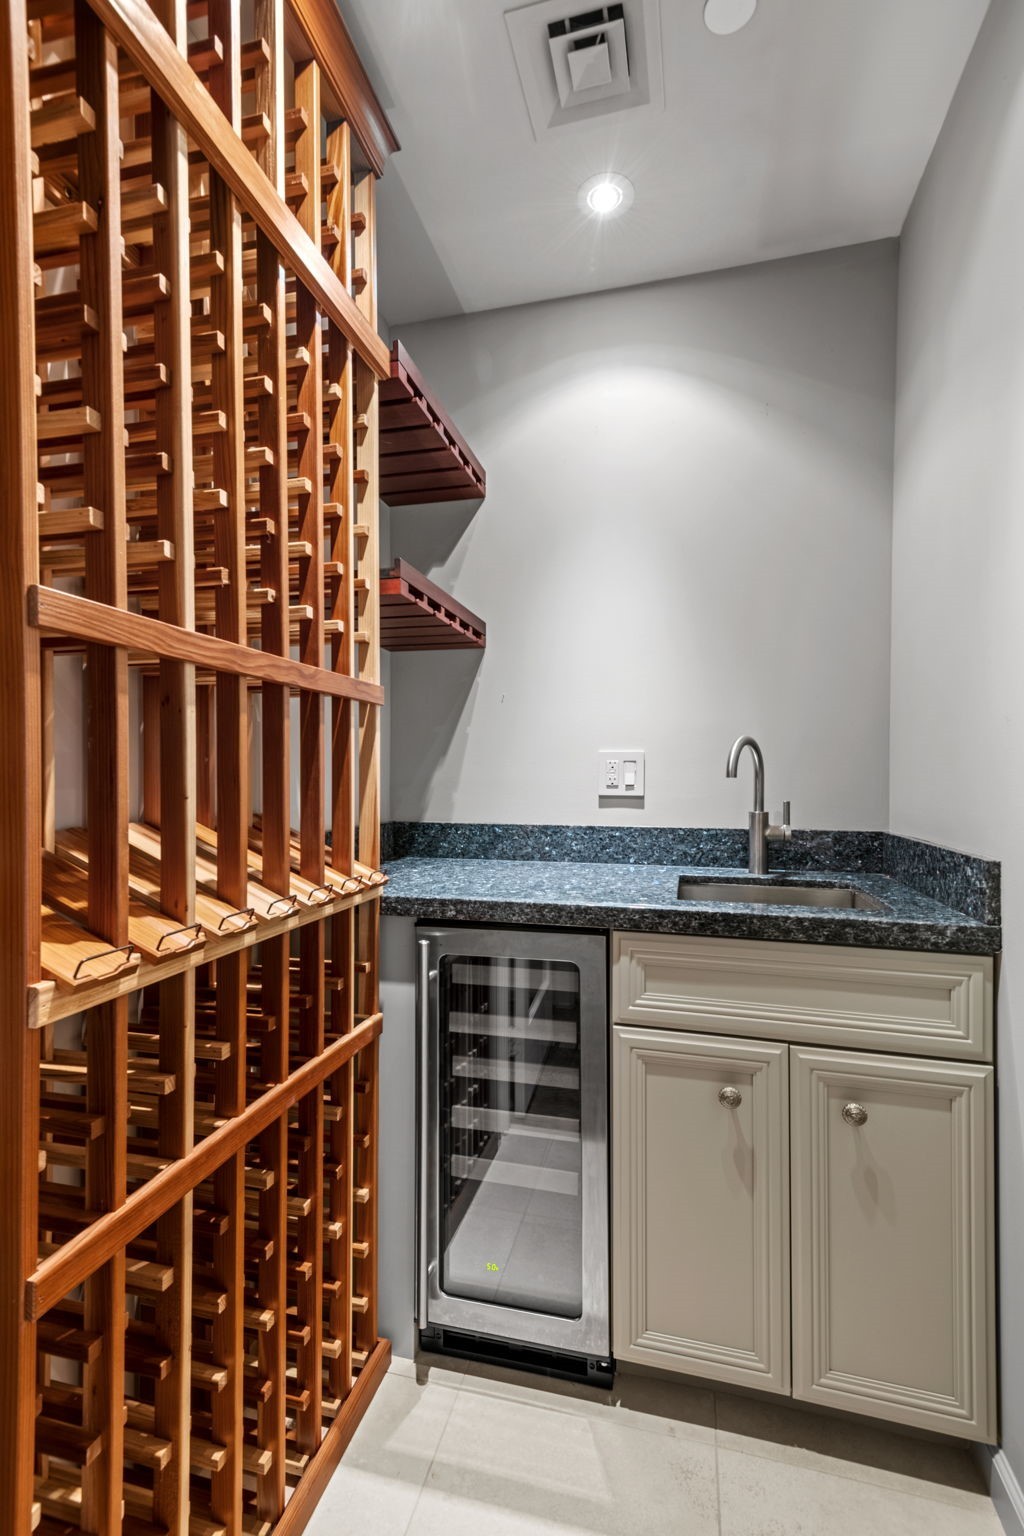 5x4 Wine Room - 
Storage is available for 126 bottles. Wine refrigerator and glass racks are also part of the package. Sink is set in a granite counter. All is ready for your next gathering.